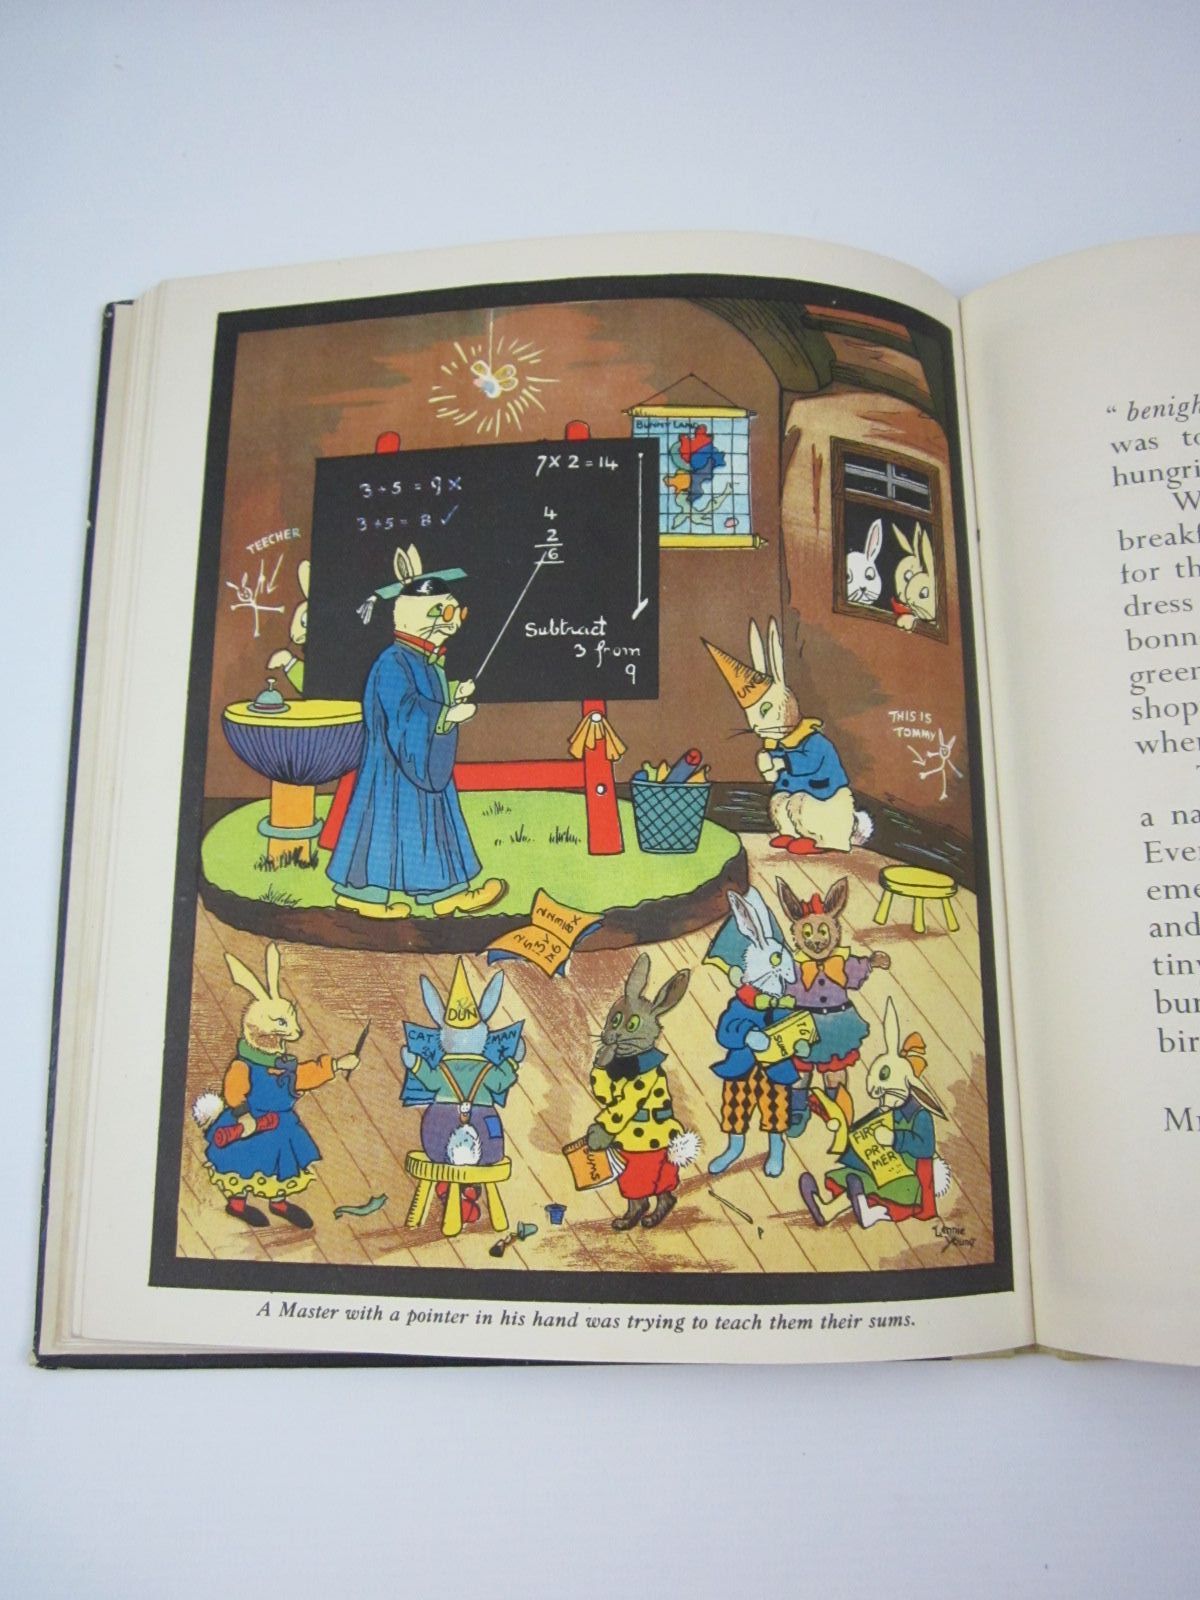 Photo of THE ADVENTURES OF PETER AND JUDY IN BUNNYLAND written by Uttley, Alison illustrated by Young, Lennie published by Collins (STOCK CODE: 1501331)  for sale by Stella & Rose's Books